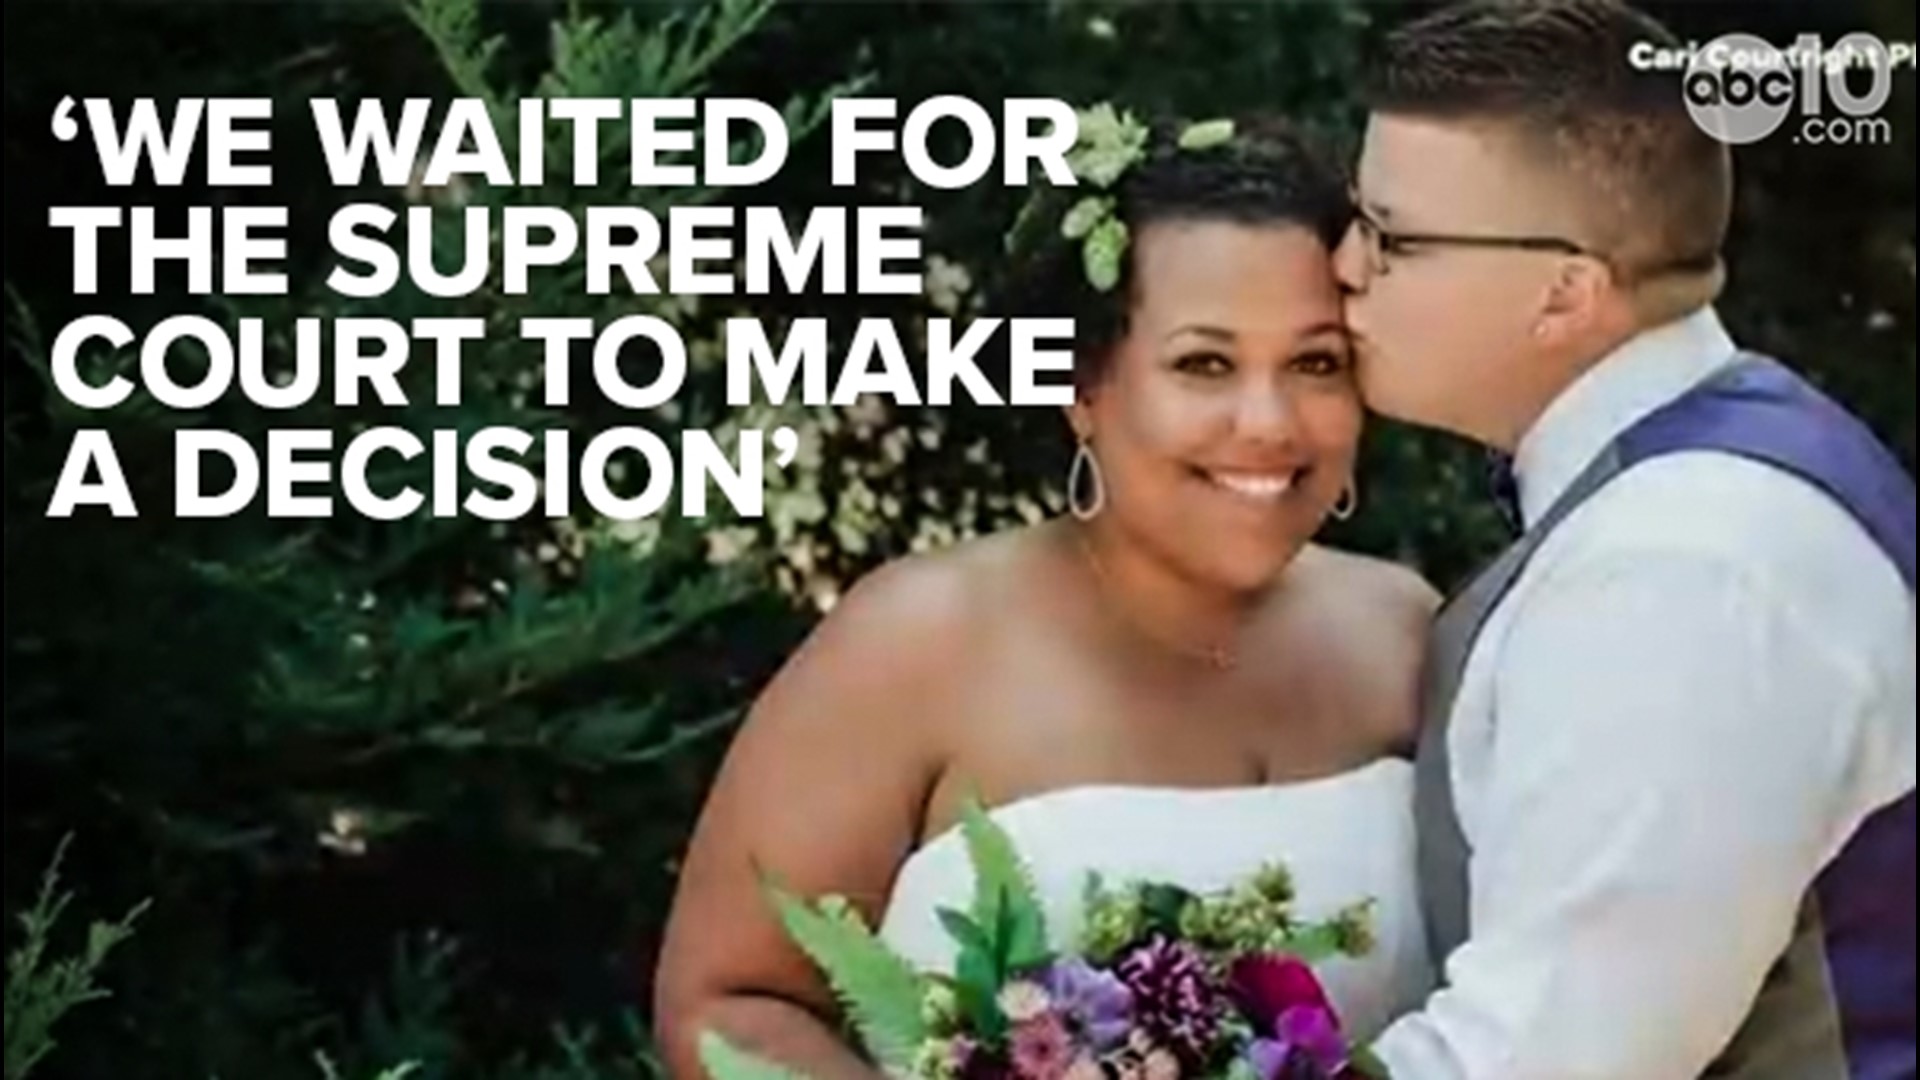 California same-sex couples want gay and interracial marriage rights upheld abc10 image